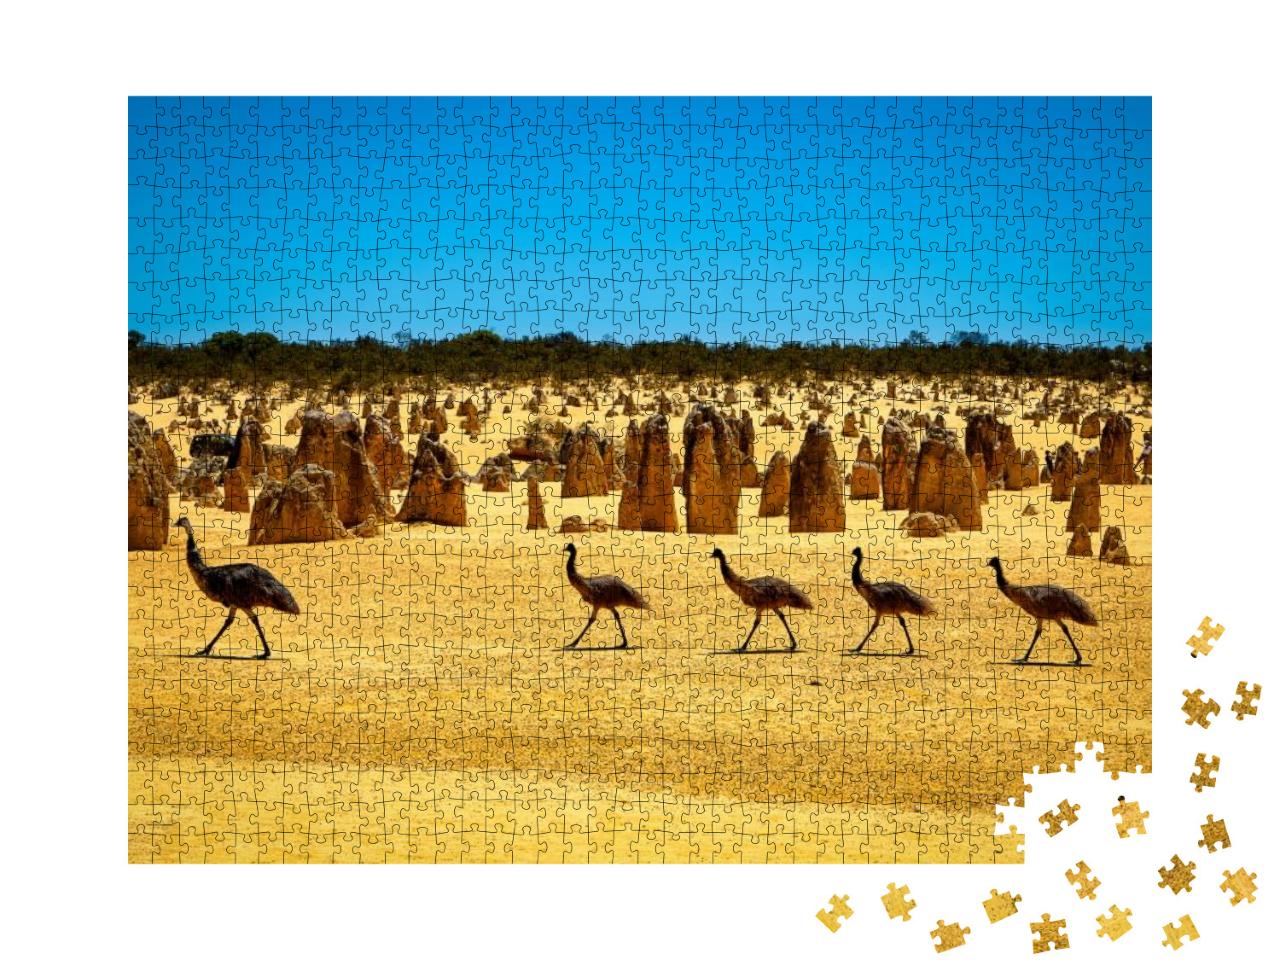 Emus At the Pinnacles Desert, Wa, Australia... Jigsaw Puzzle with 1000 pieces